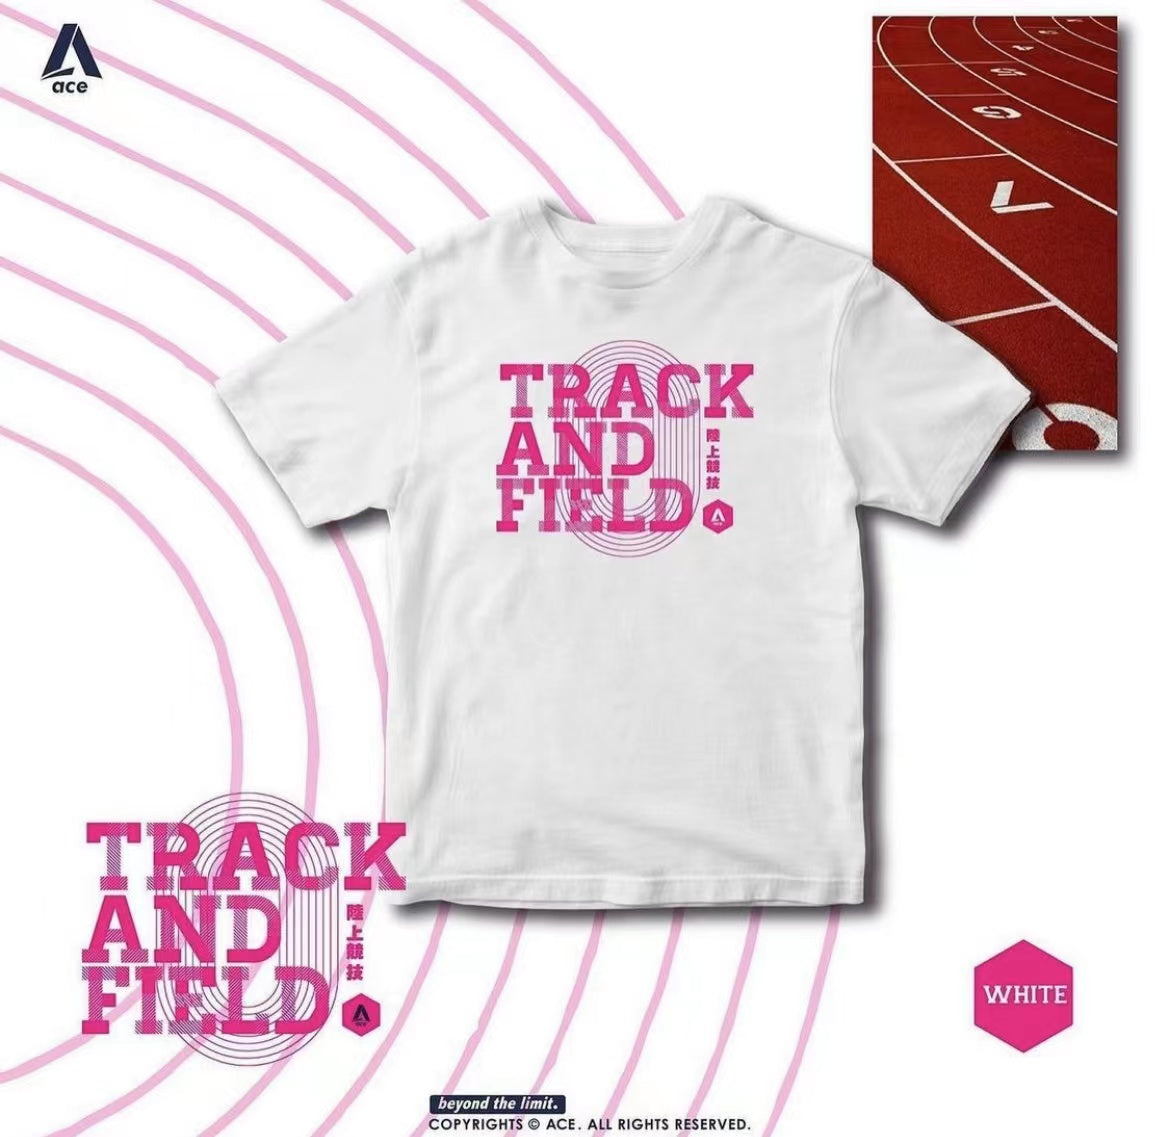 ACE Track and Field Tee |  Ace Concept Store |